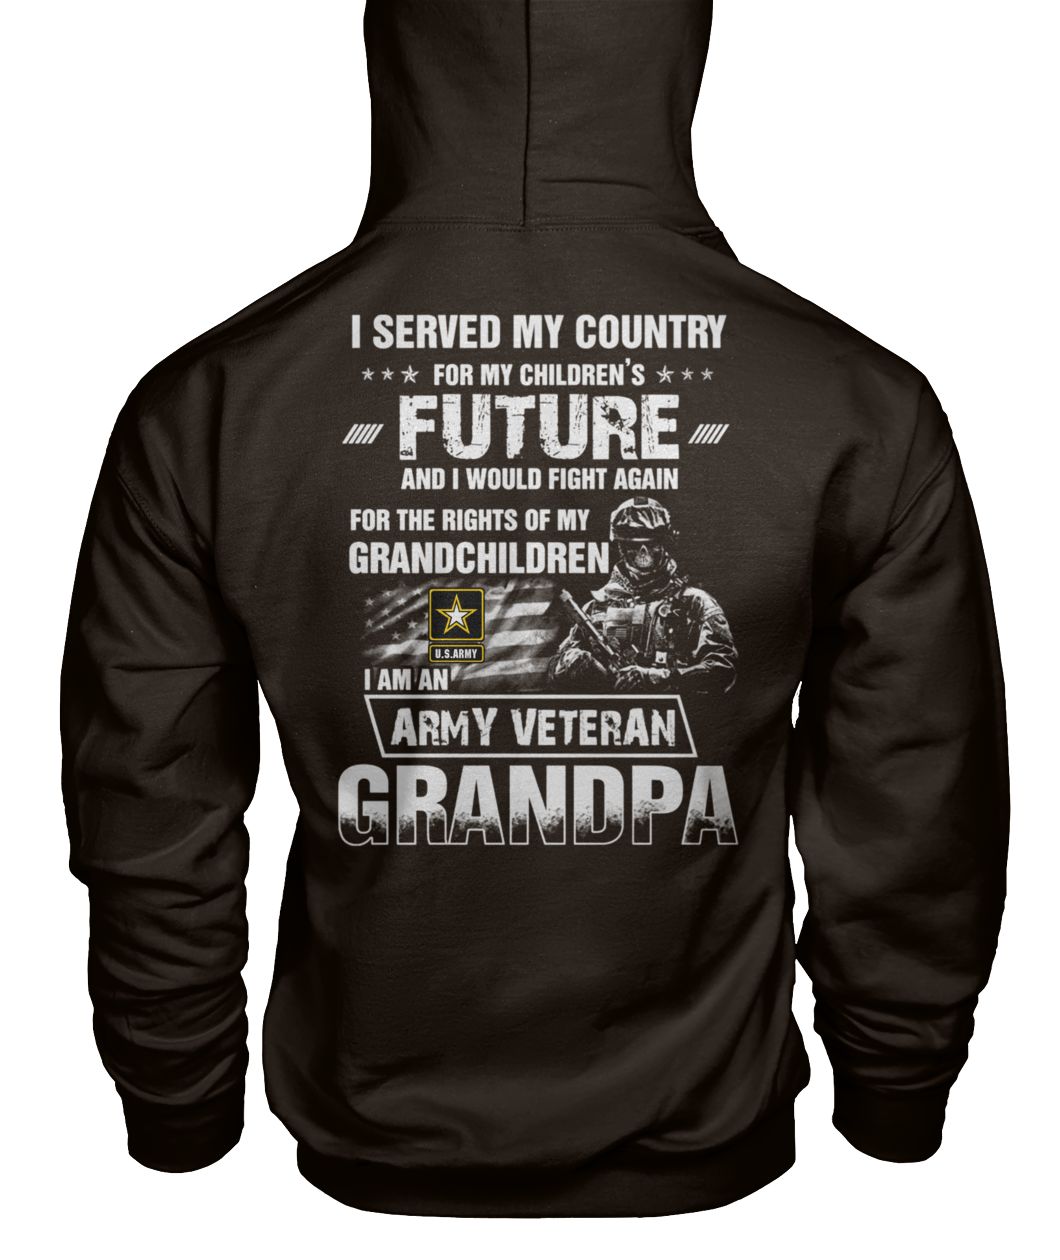 I served my country for my children’s future and I would fight again I am an army veteran grandpa U.S. army soldier gildan hoodie